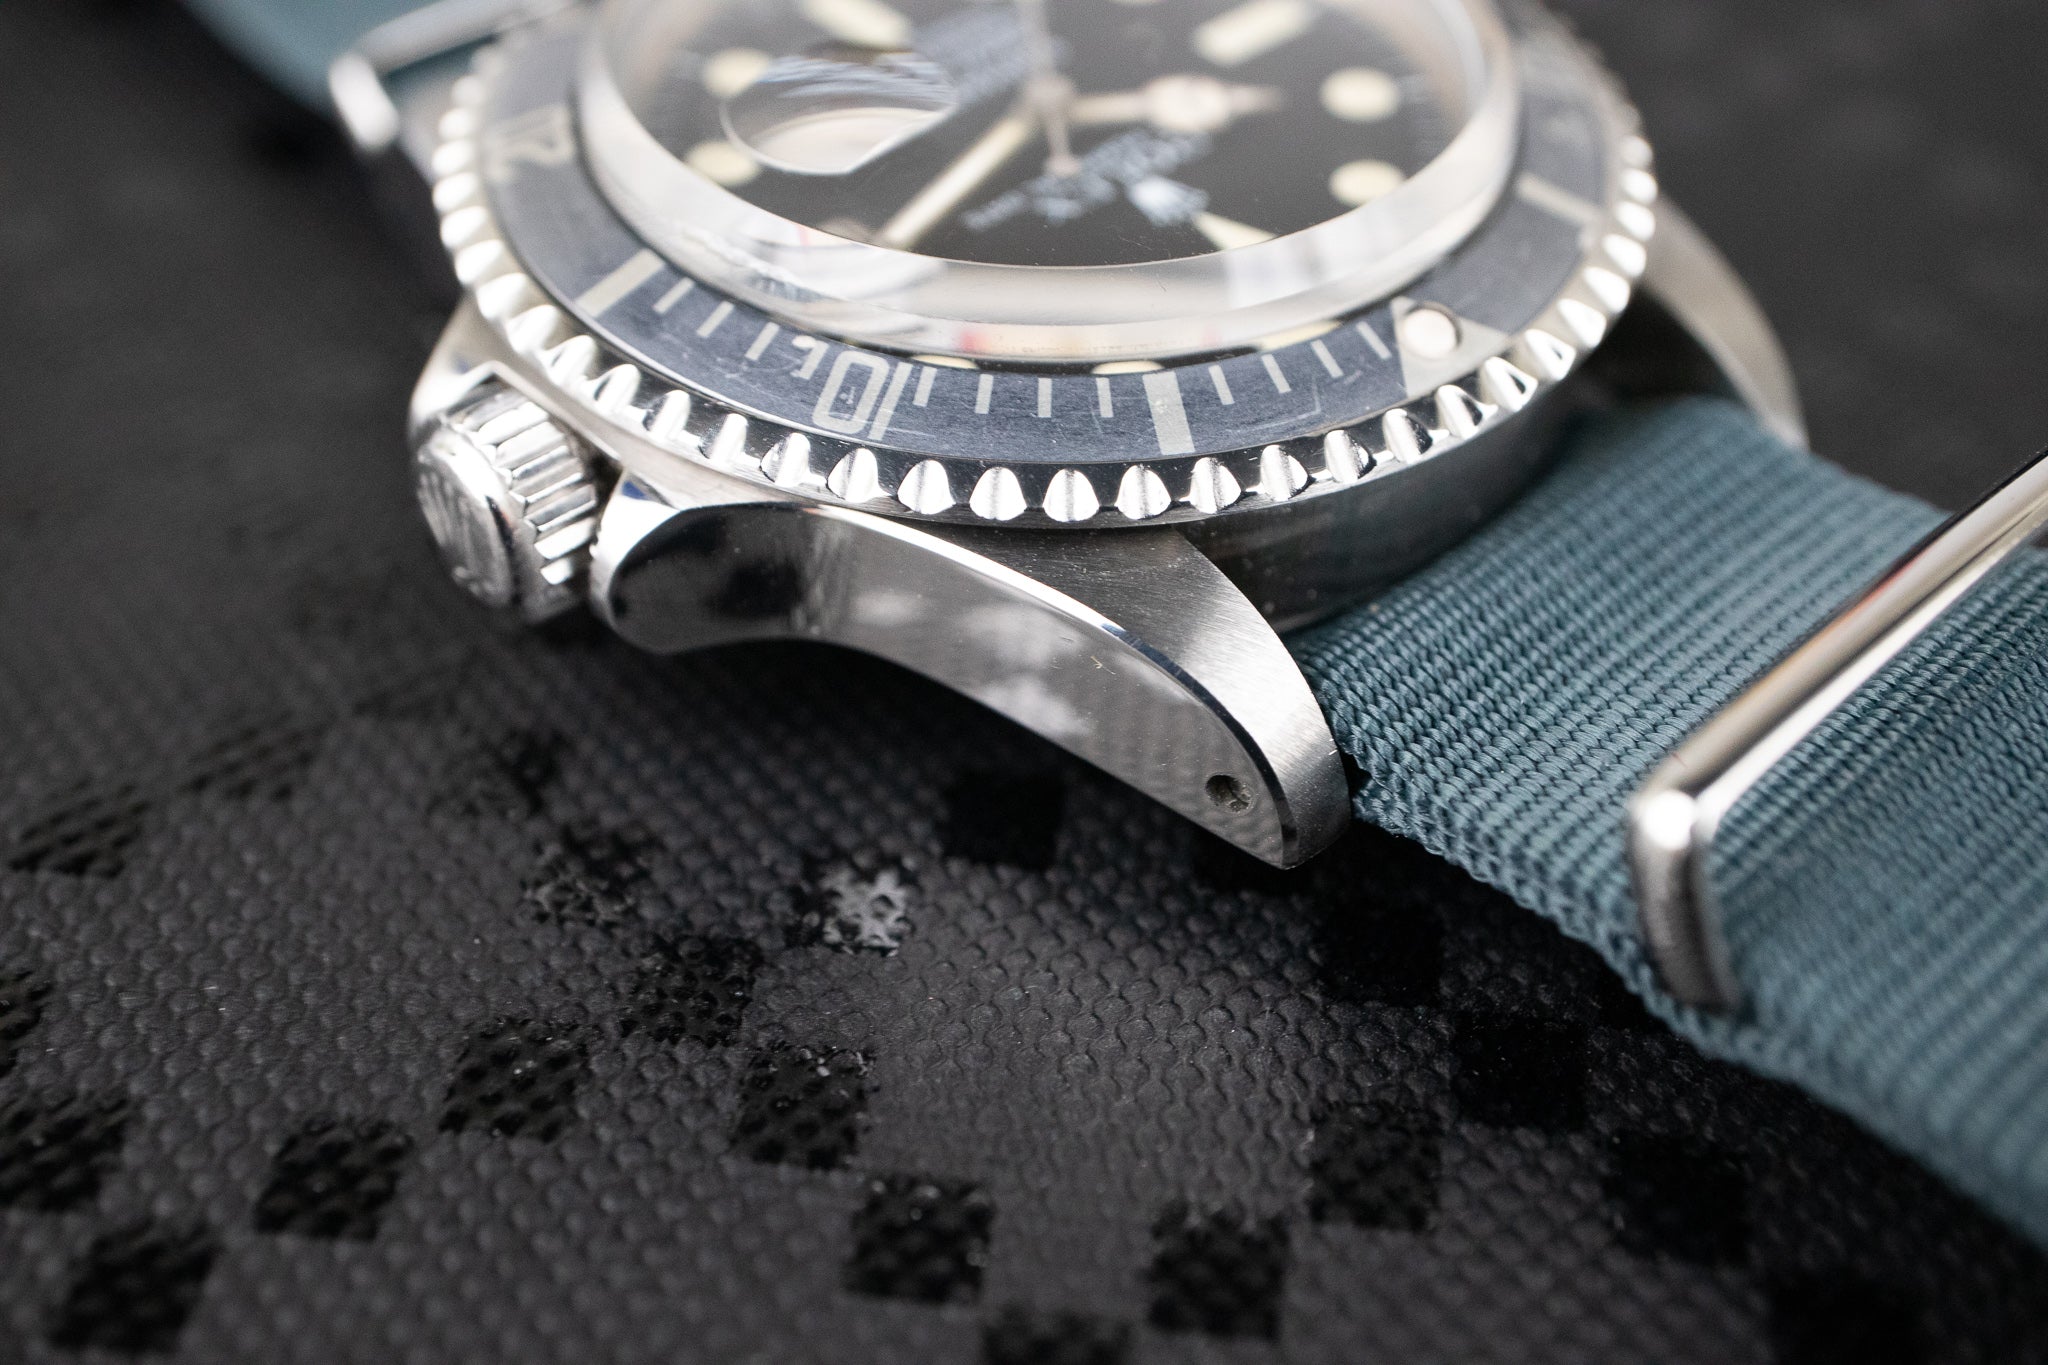 Pre-Owned: Rolex Submariner 1680